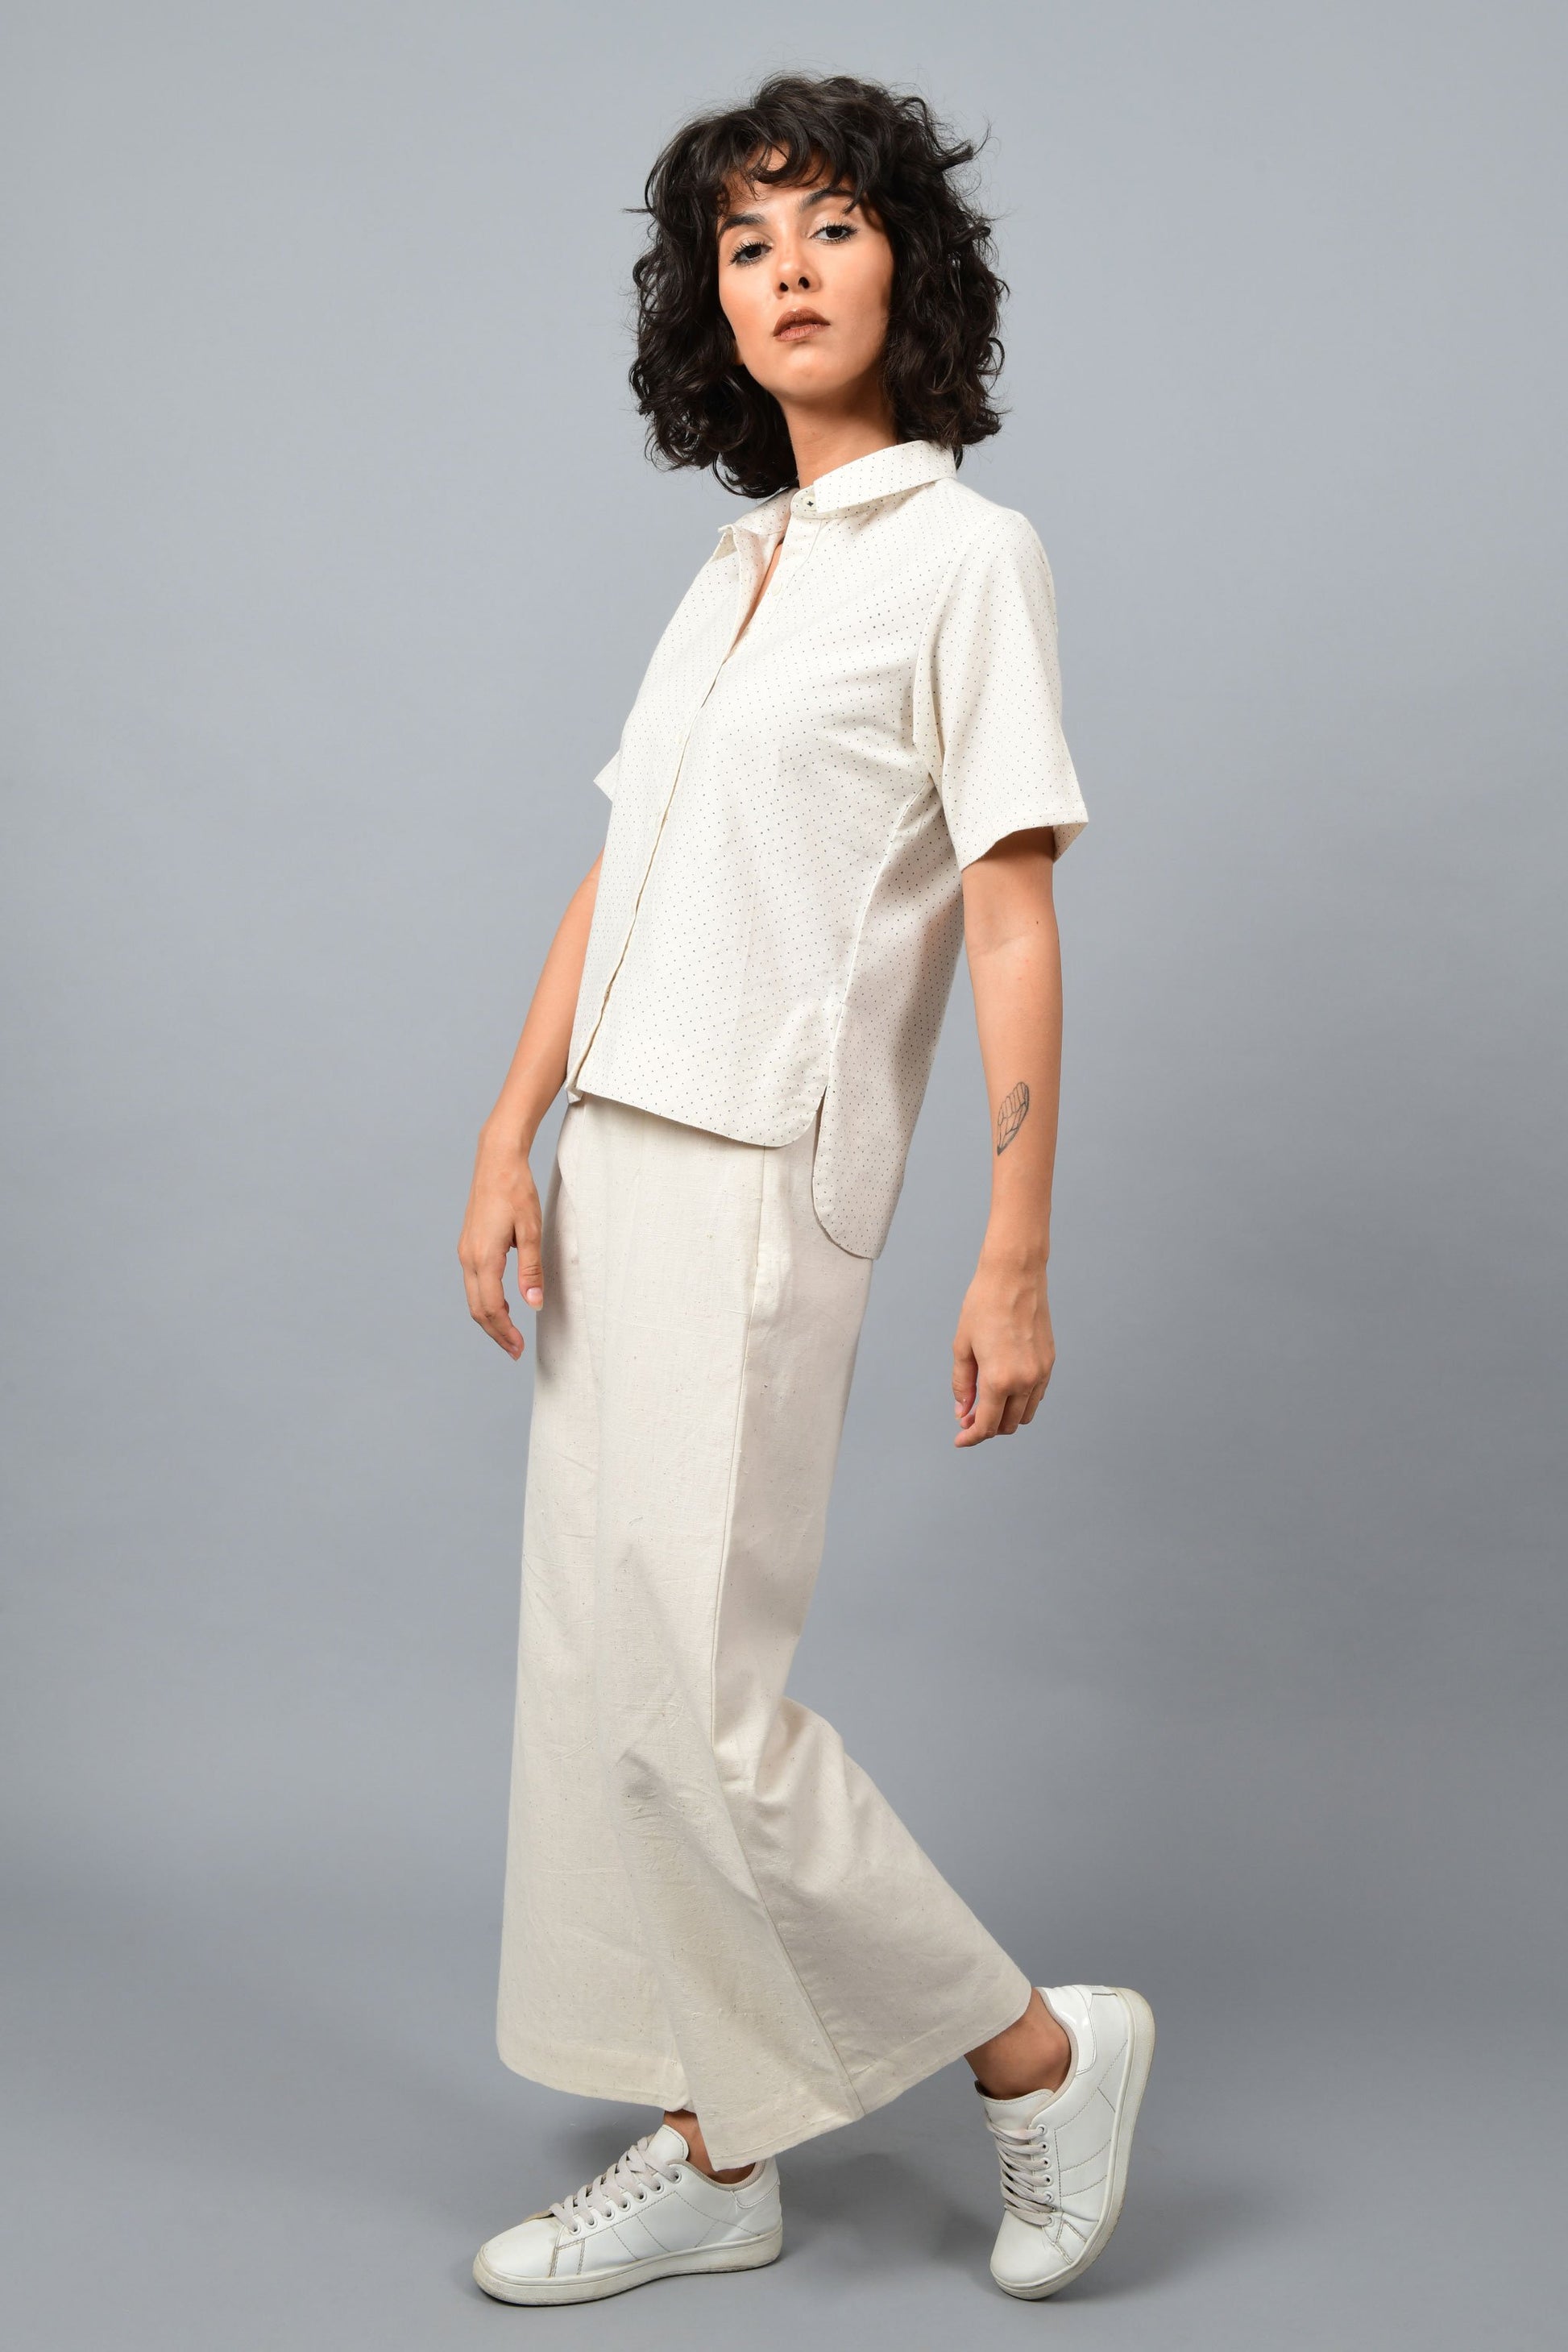 Model wearing off-white Khadi cotton relaxed shirt top printed with fine blue dots printed using metal block by Cotton Rack inspired by artist agnes martin. Posing facing left for the camera. 